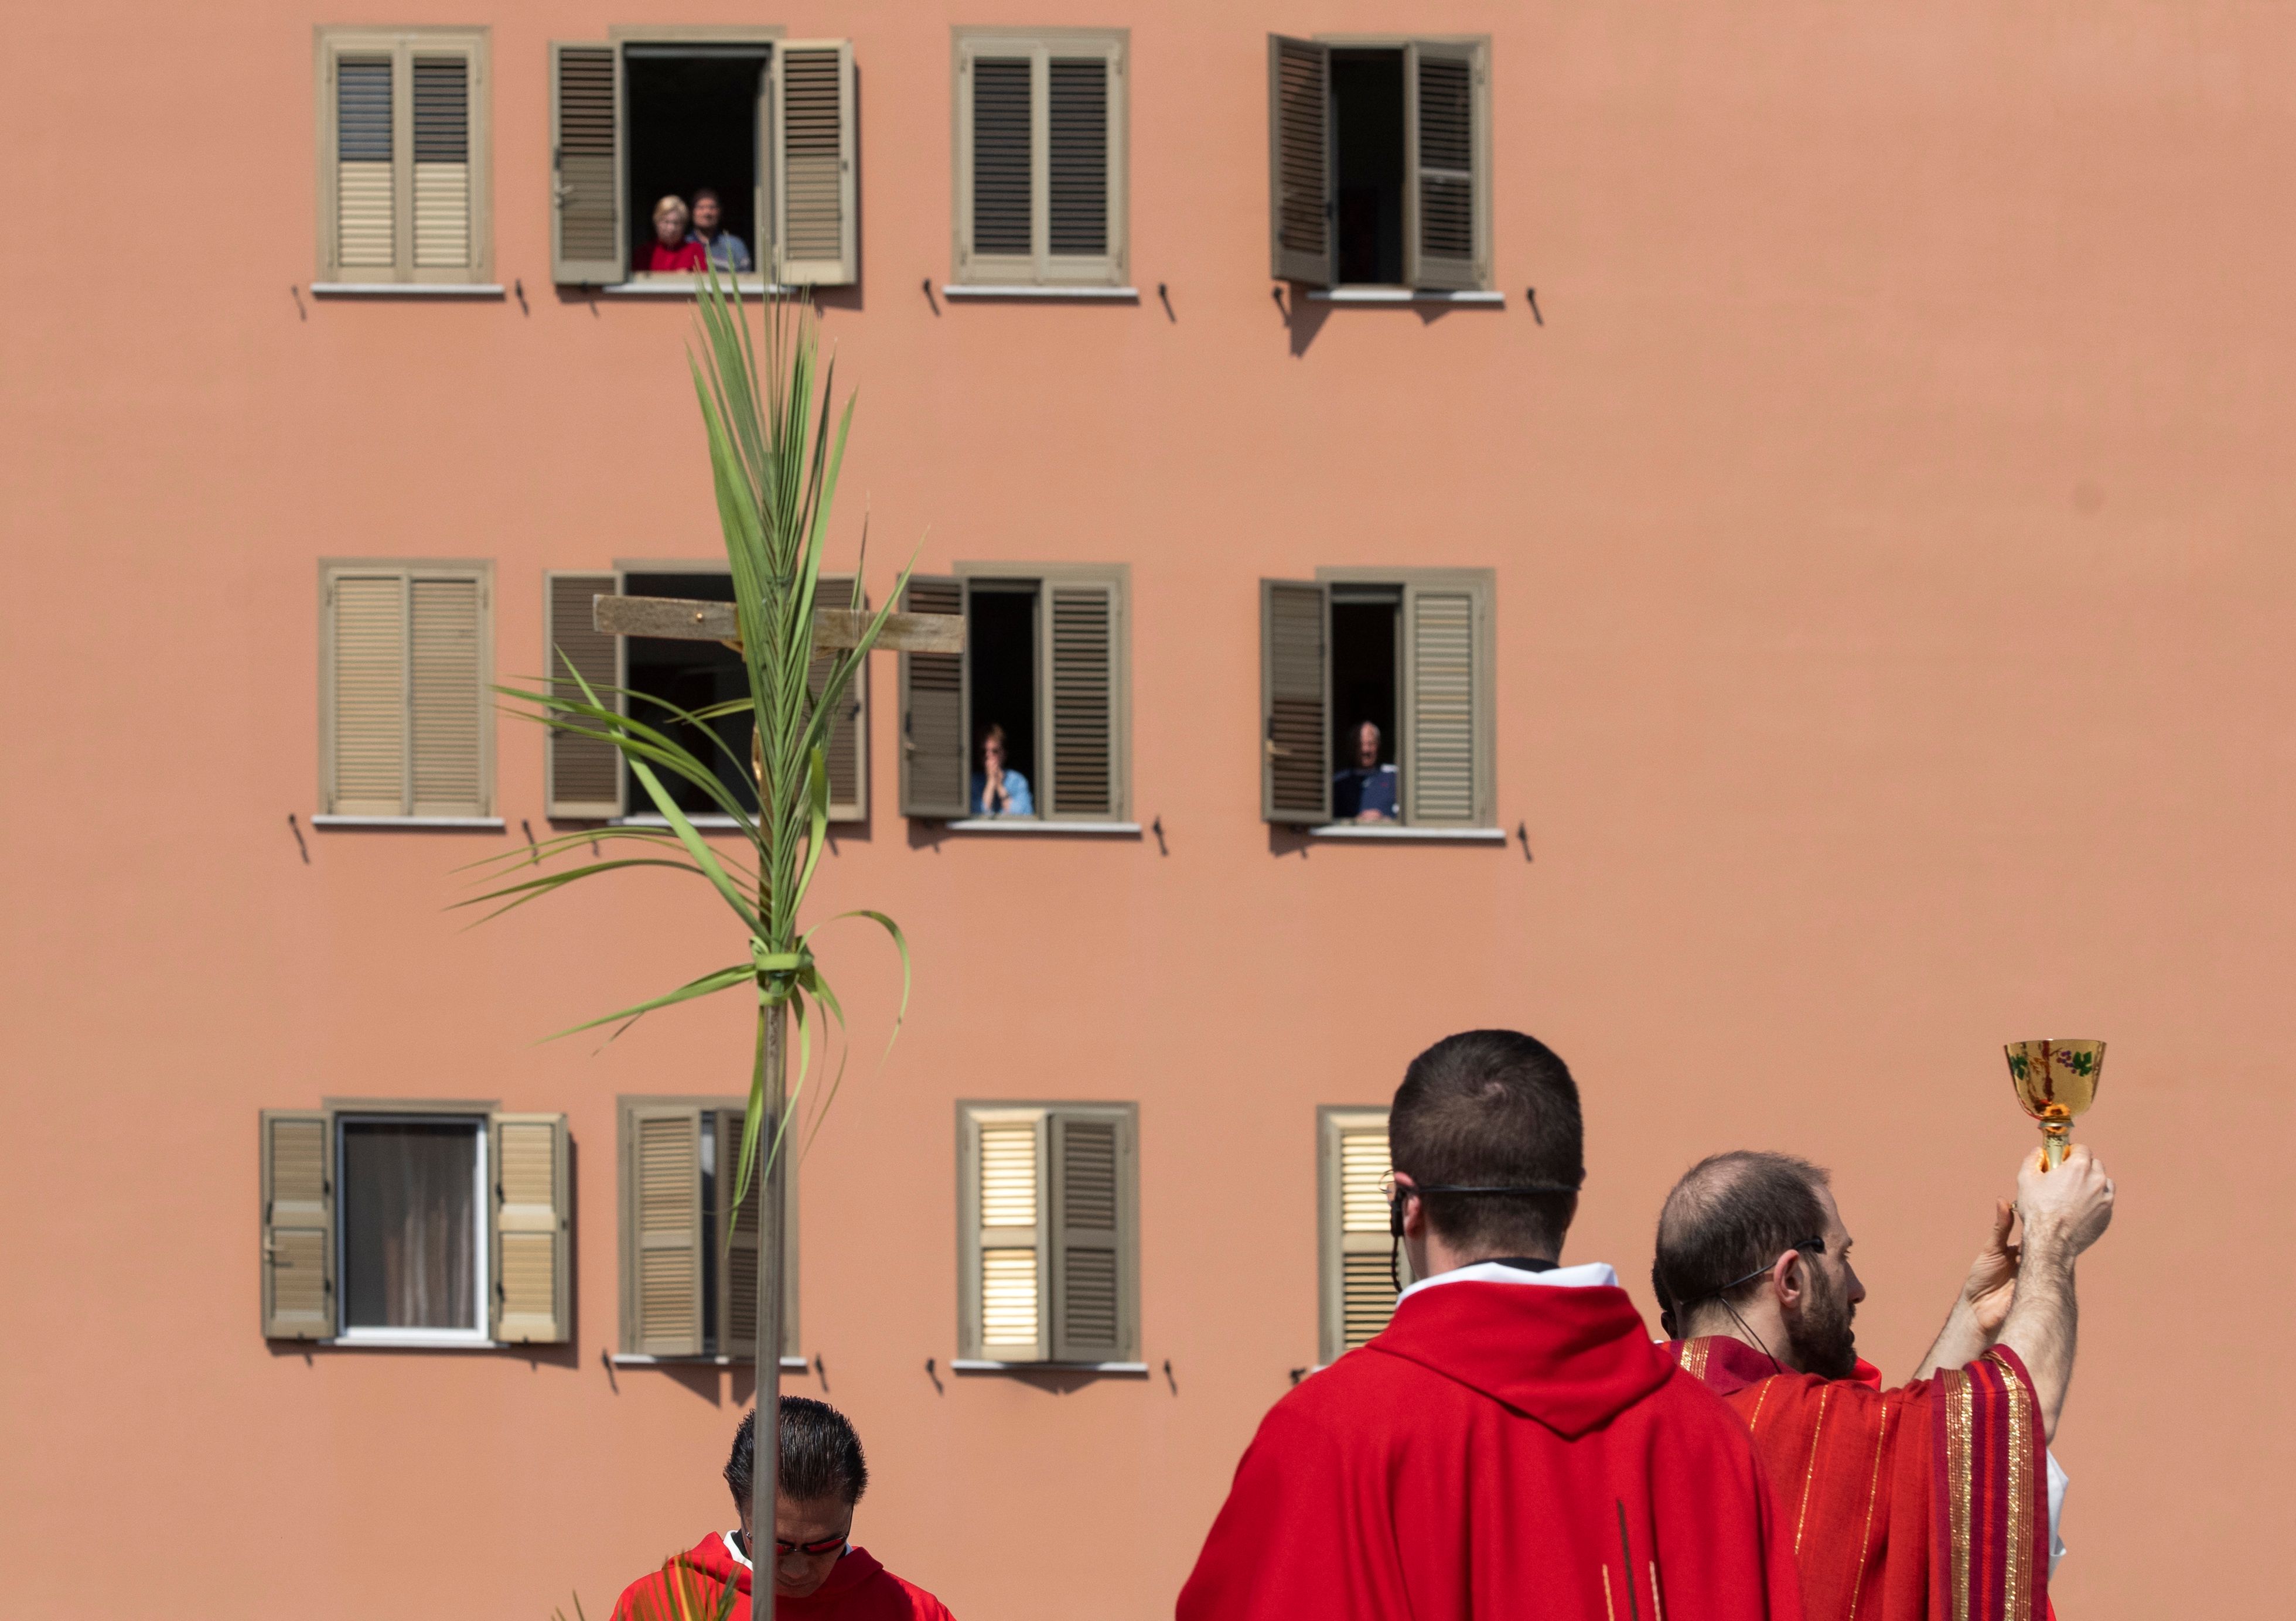 Parish priest Don Antonio Lauri (R) holds the Chalice as he celebrates Palm Sunday mass for nearby residents from the rooftop of the San Gabriele dell'Addolorata church in Rome on April 5, 2020, during the country's lockdown. (Photo by TIZIANA FABI/AFP via Getty Images)